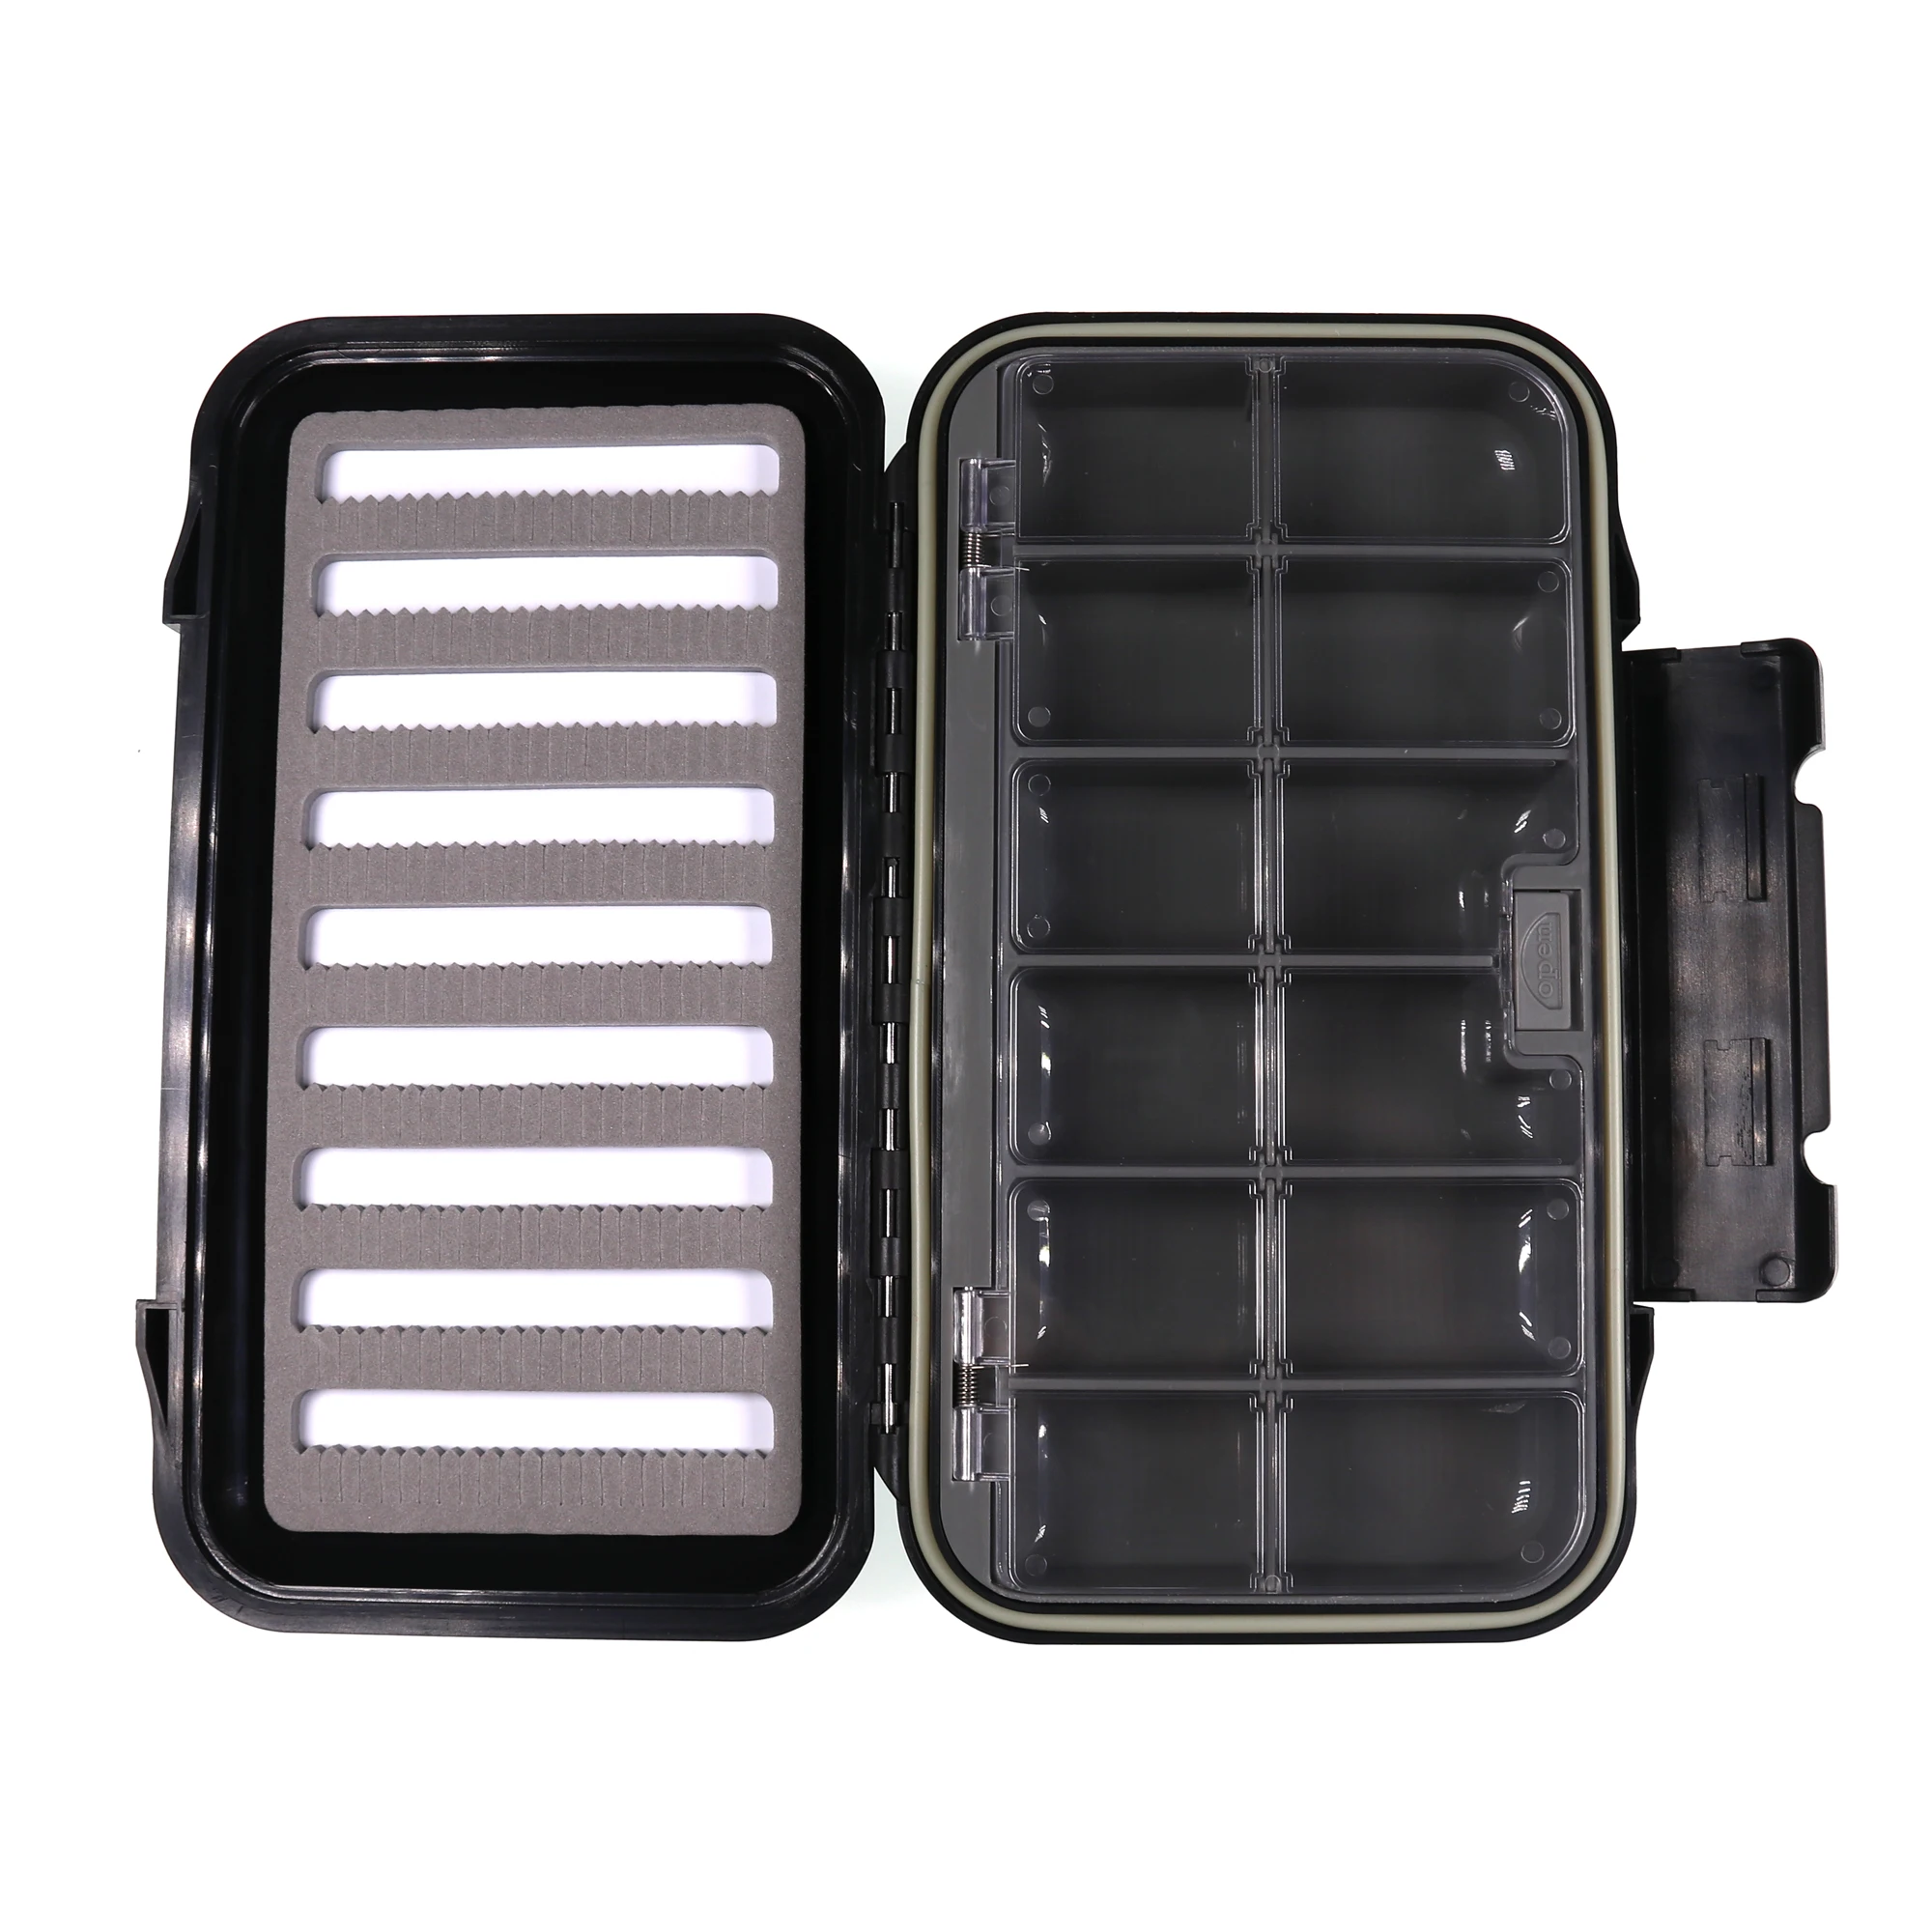 

Double Side Waterproof Plastic Fly Fishing Box Storage Box Lure Storage Case Trout Fishing Fly Box For Dry/Wet/ Nymph/Streamer, As picture shows